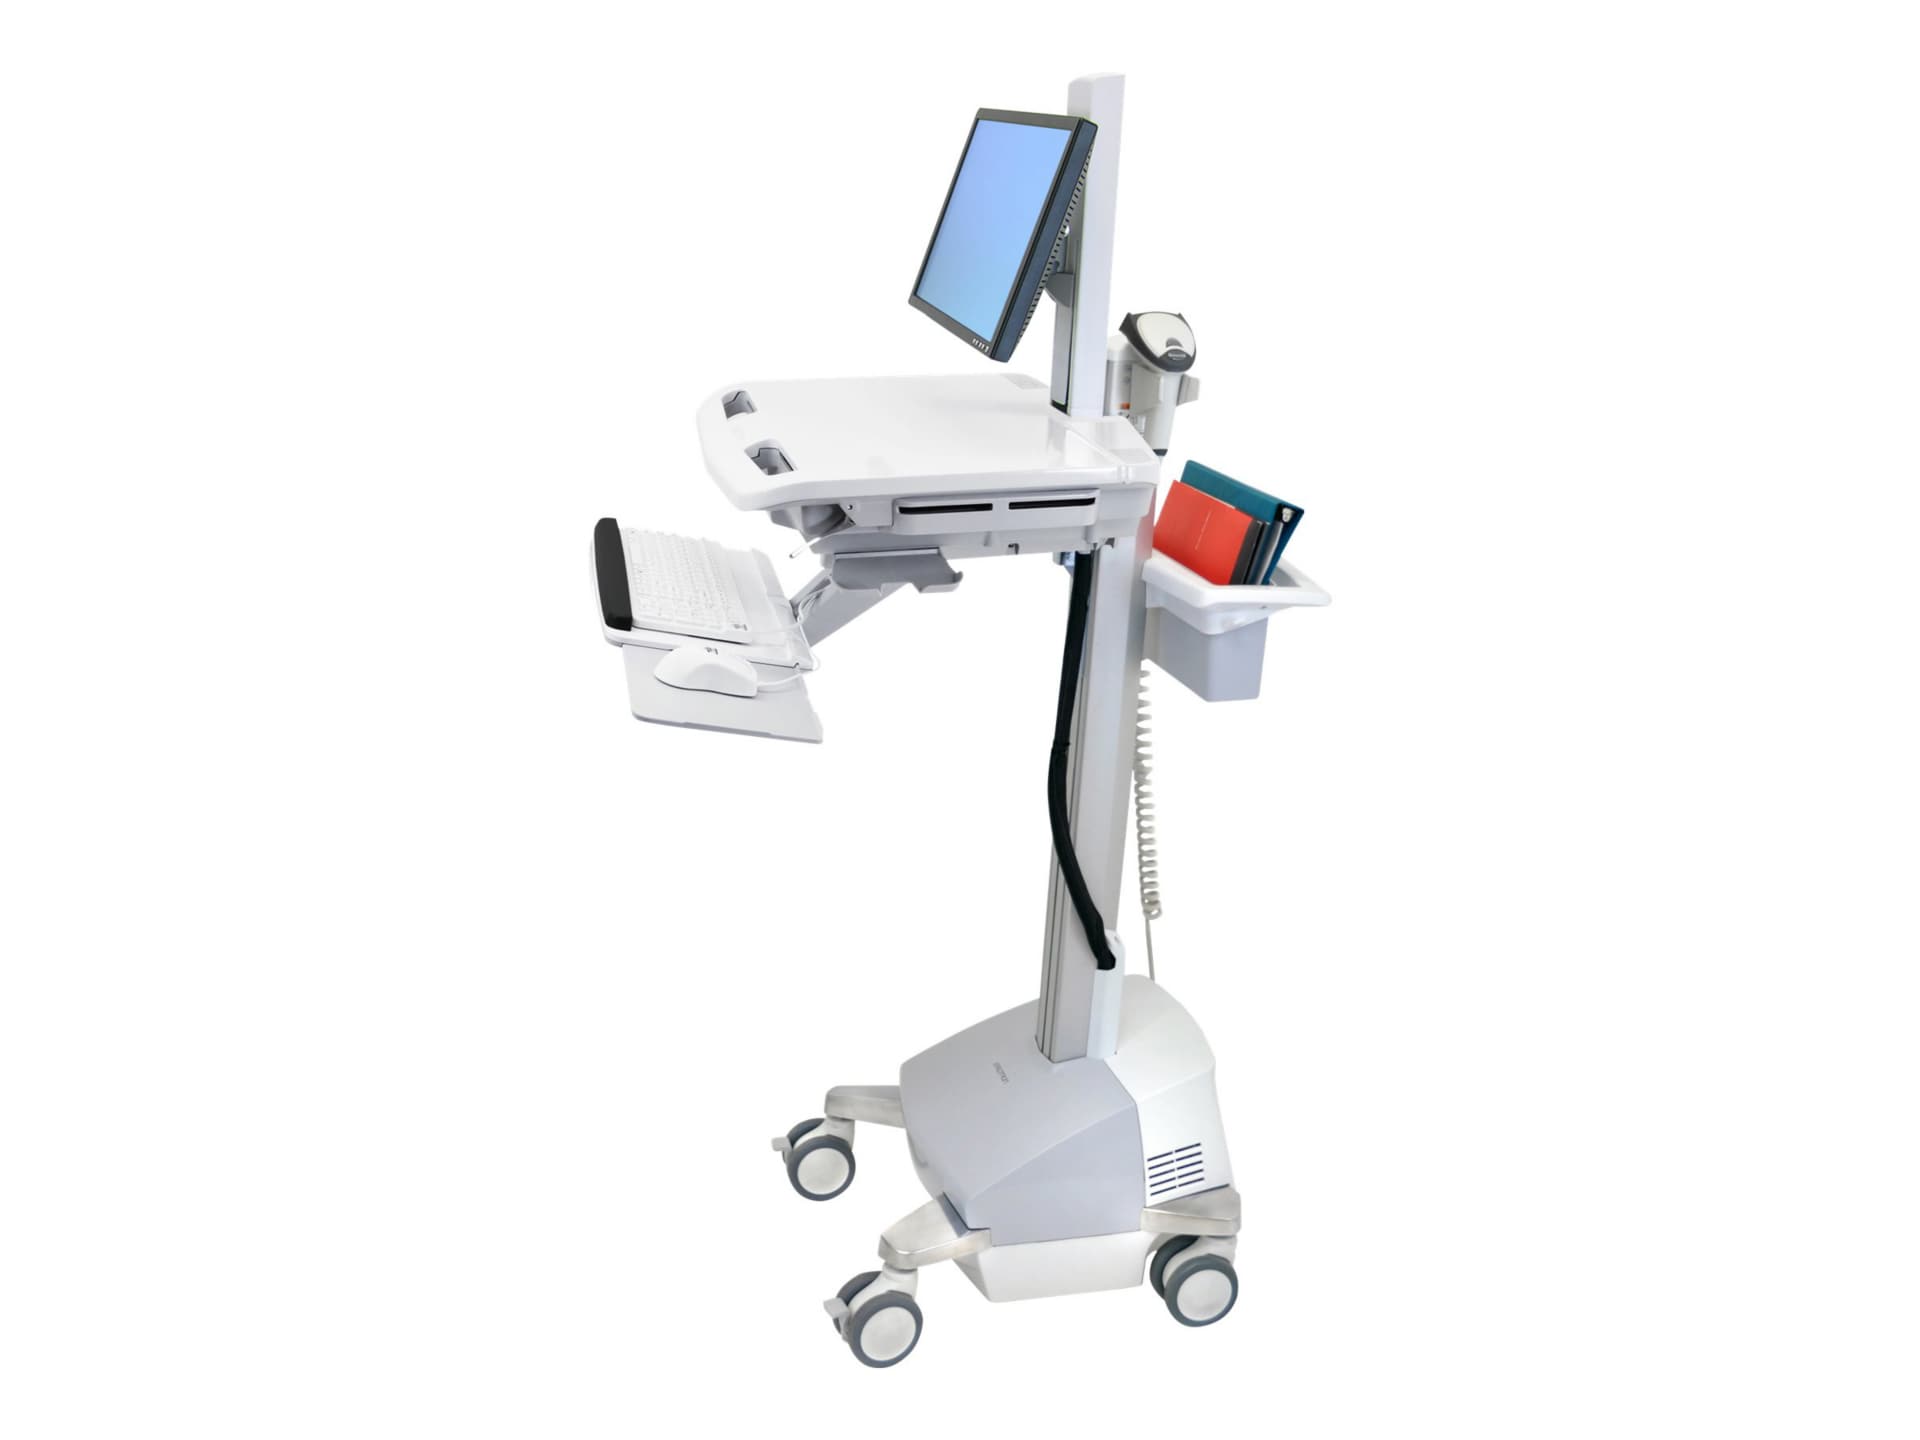 Ergotron StyleView EMR Cart with LCD Pivot, Powered cart - for LCD display